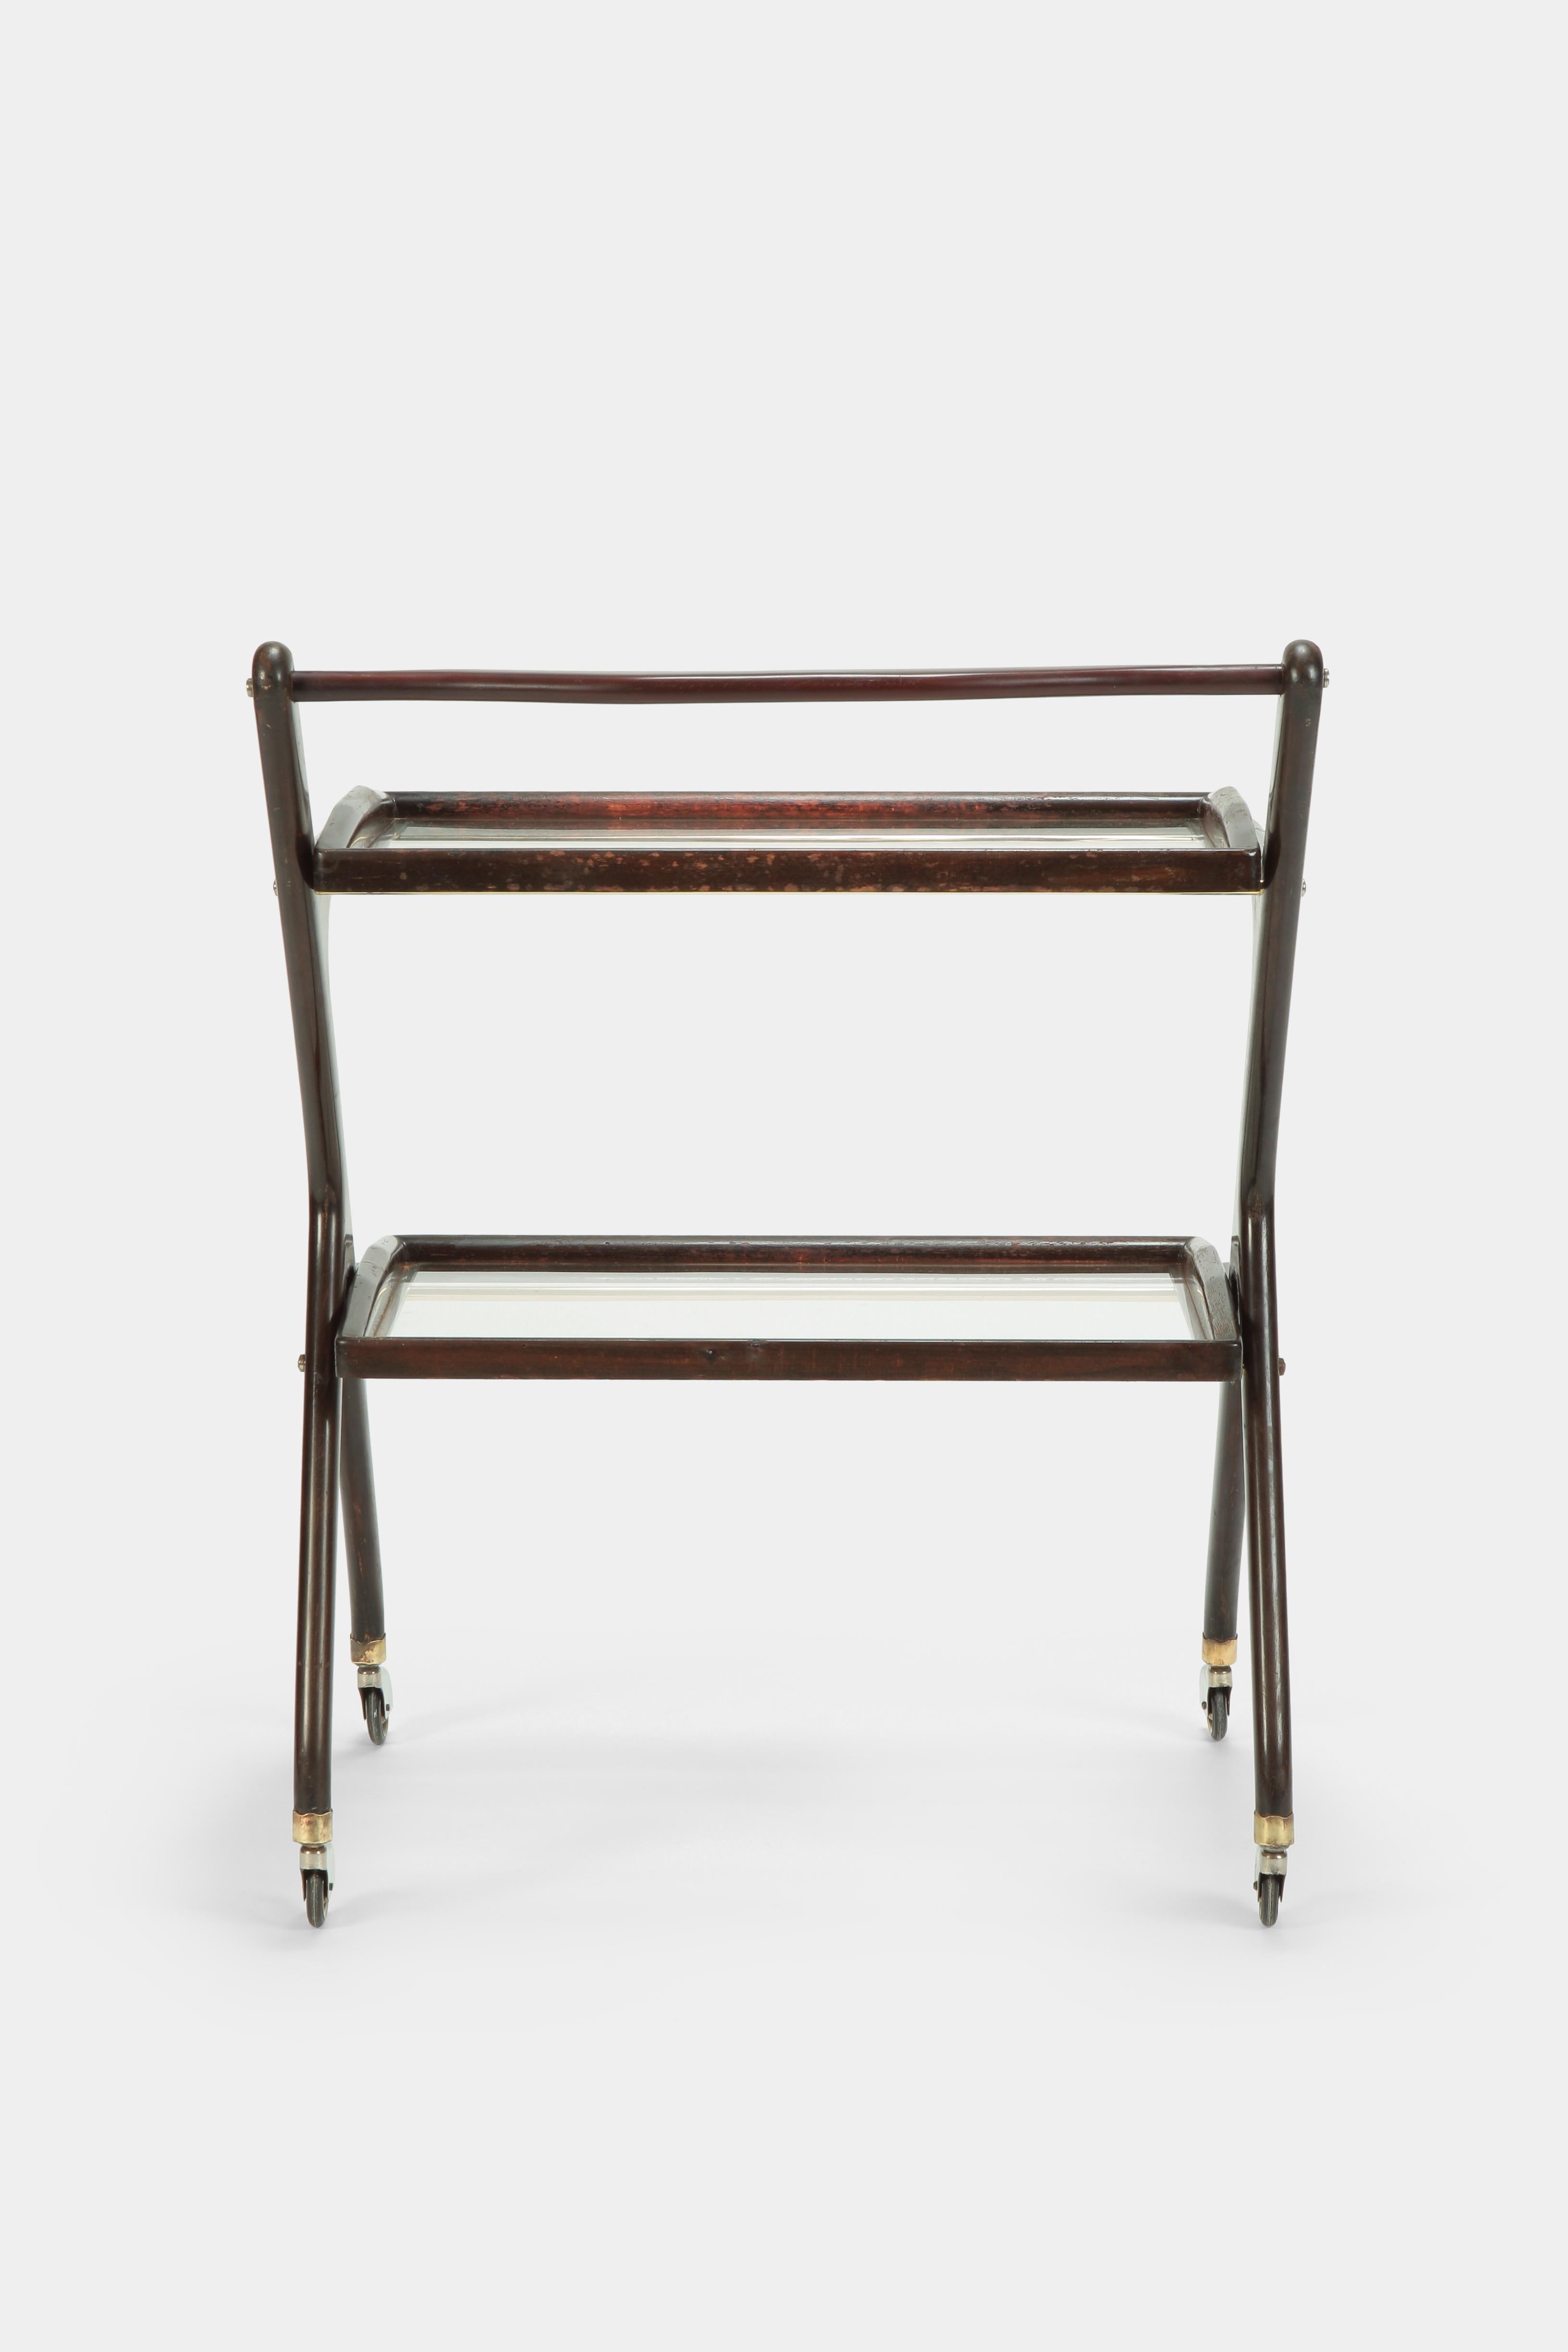 Brass Cesare Lacca Bar Cart Mahogany, 1950s For Sale